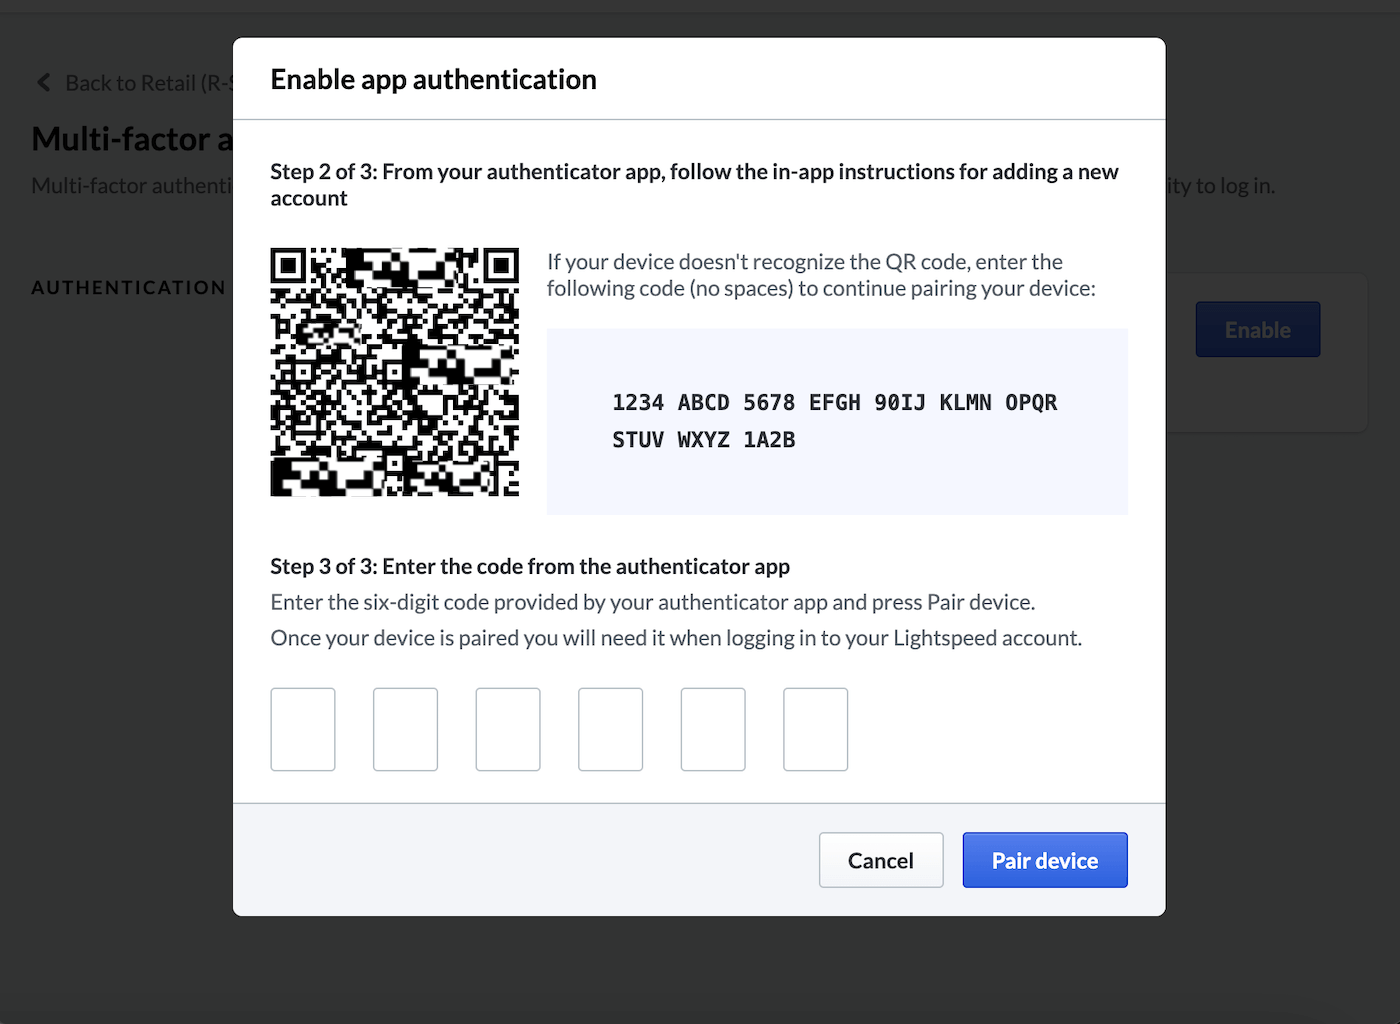 Pair device with QR